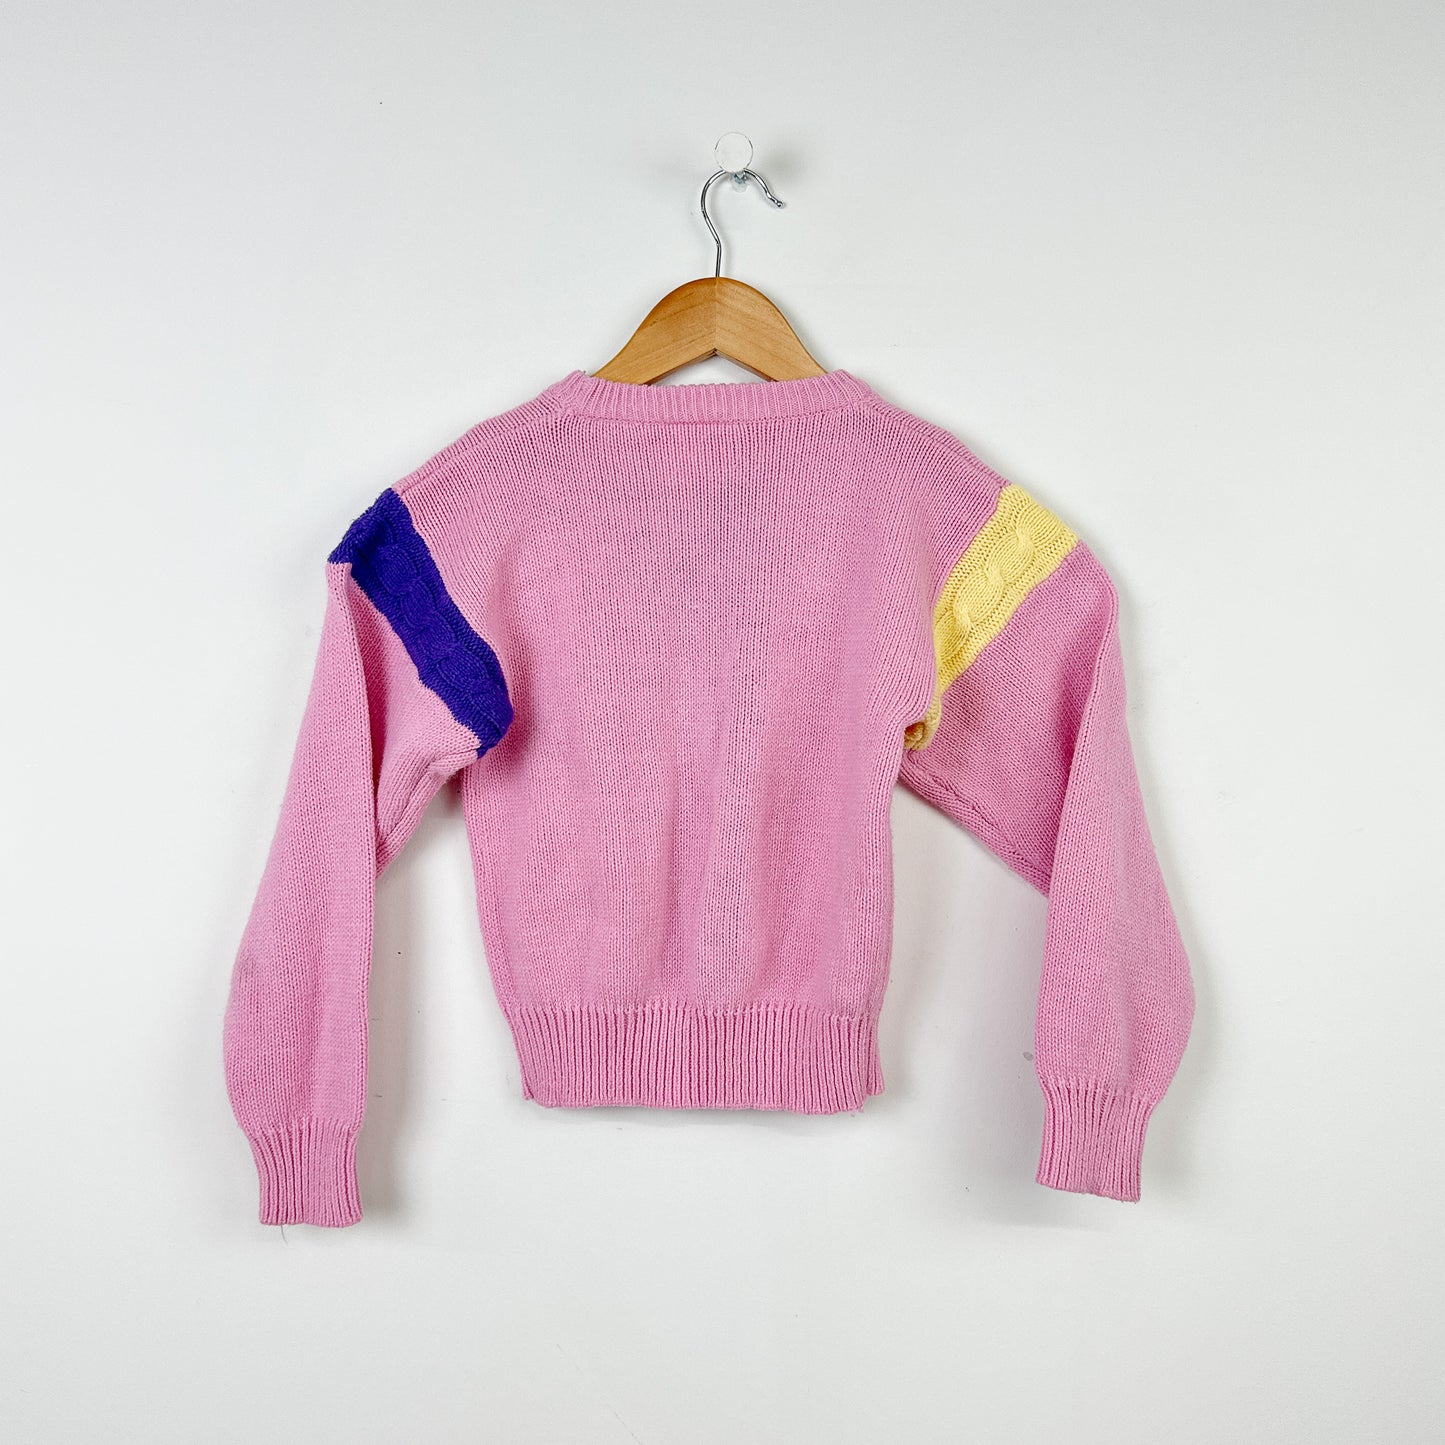 80's Vintage Pastels Cable Knit Sweater - Size 6-7yr